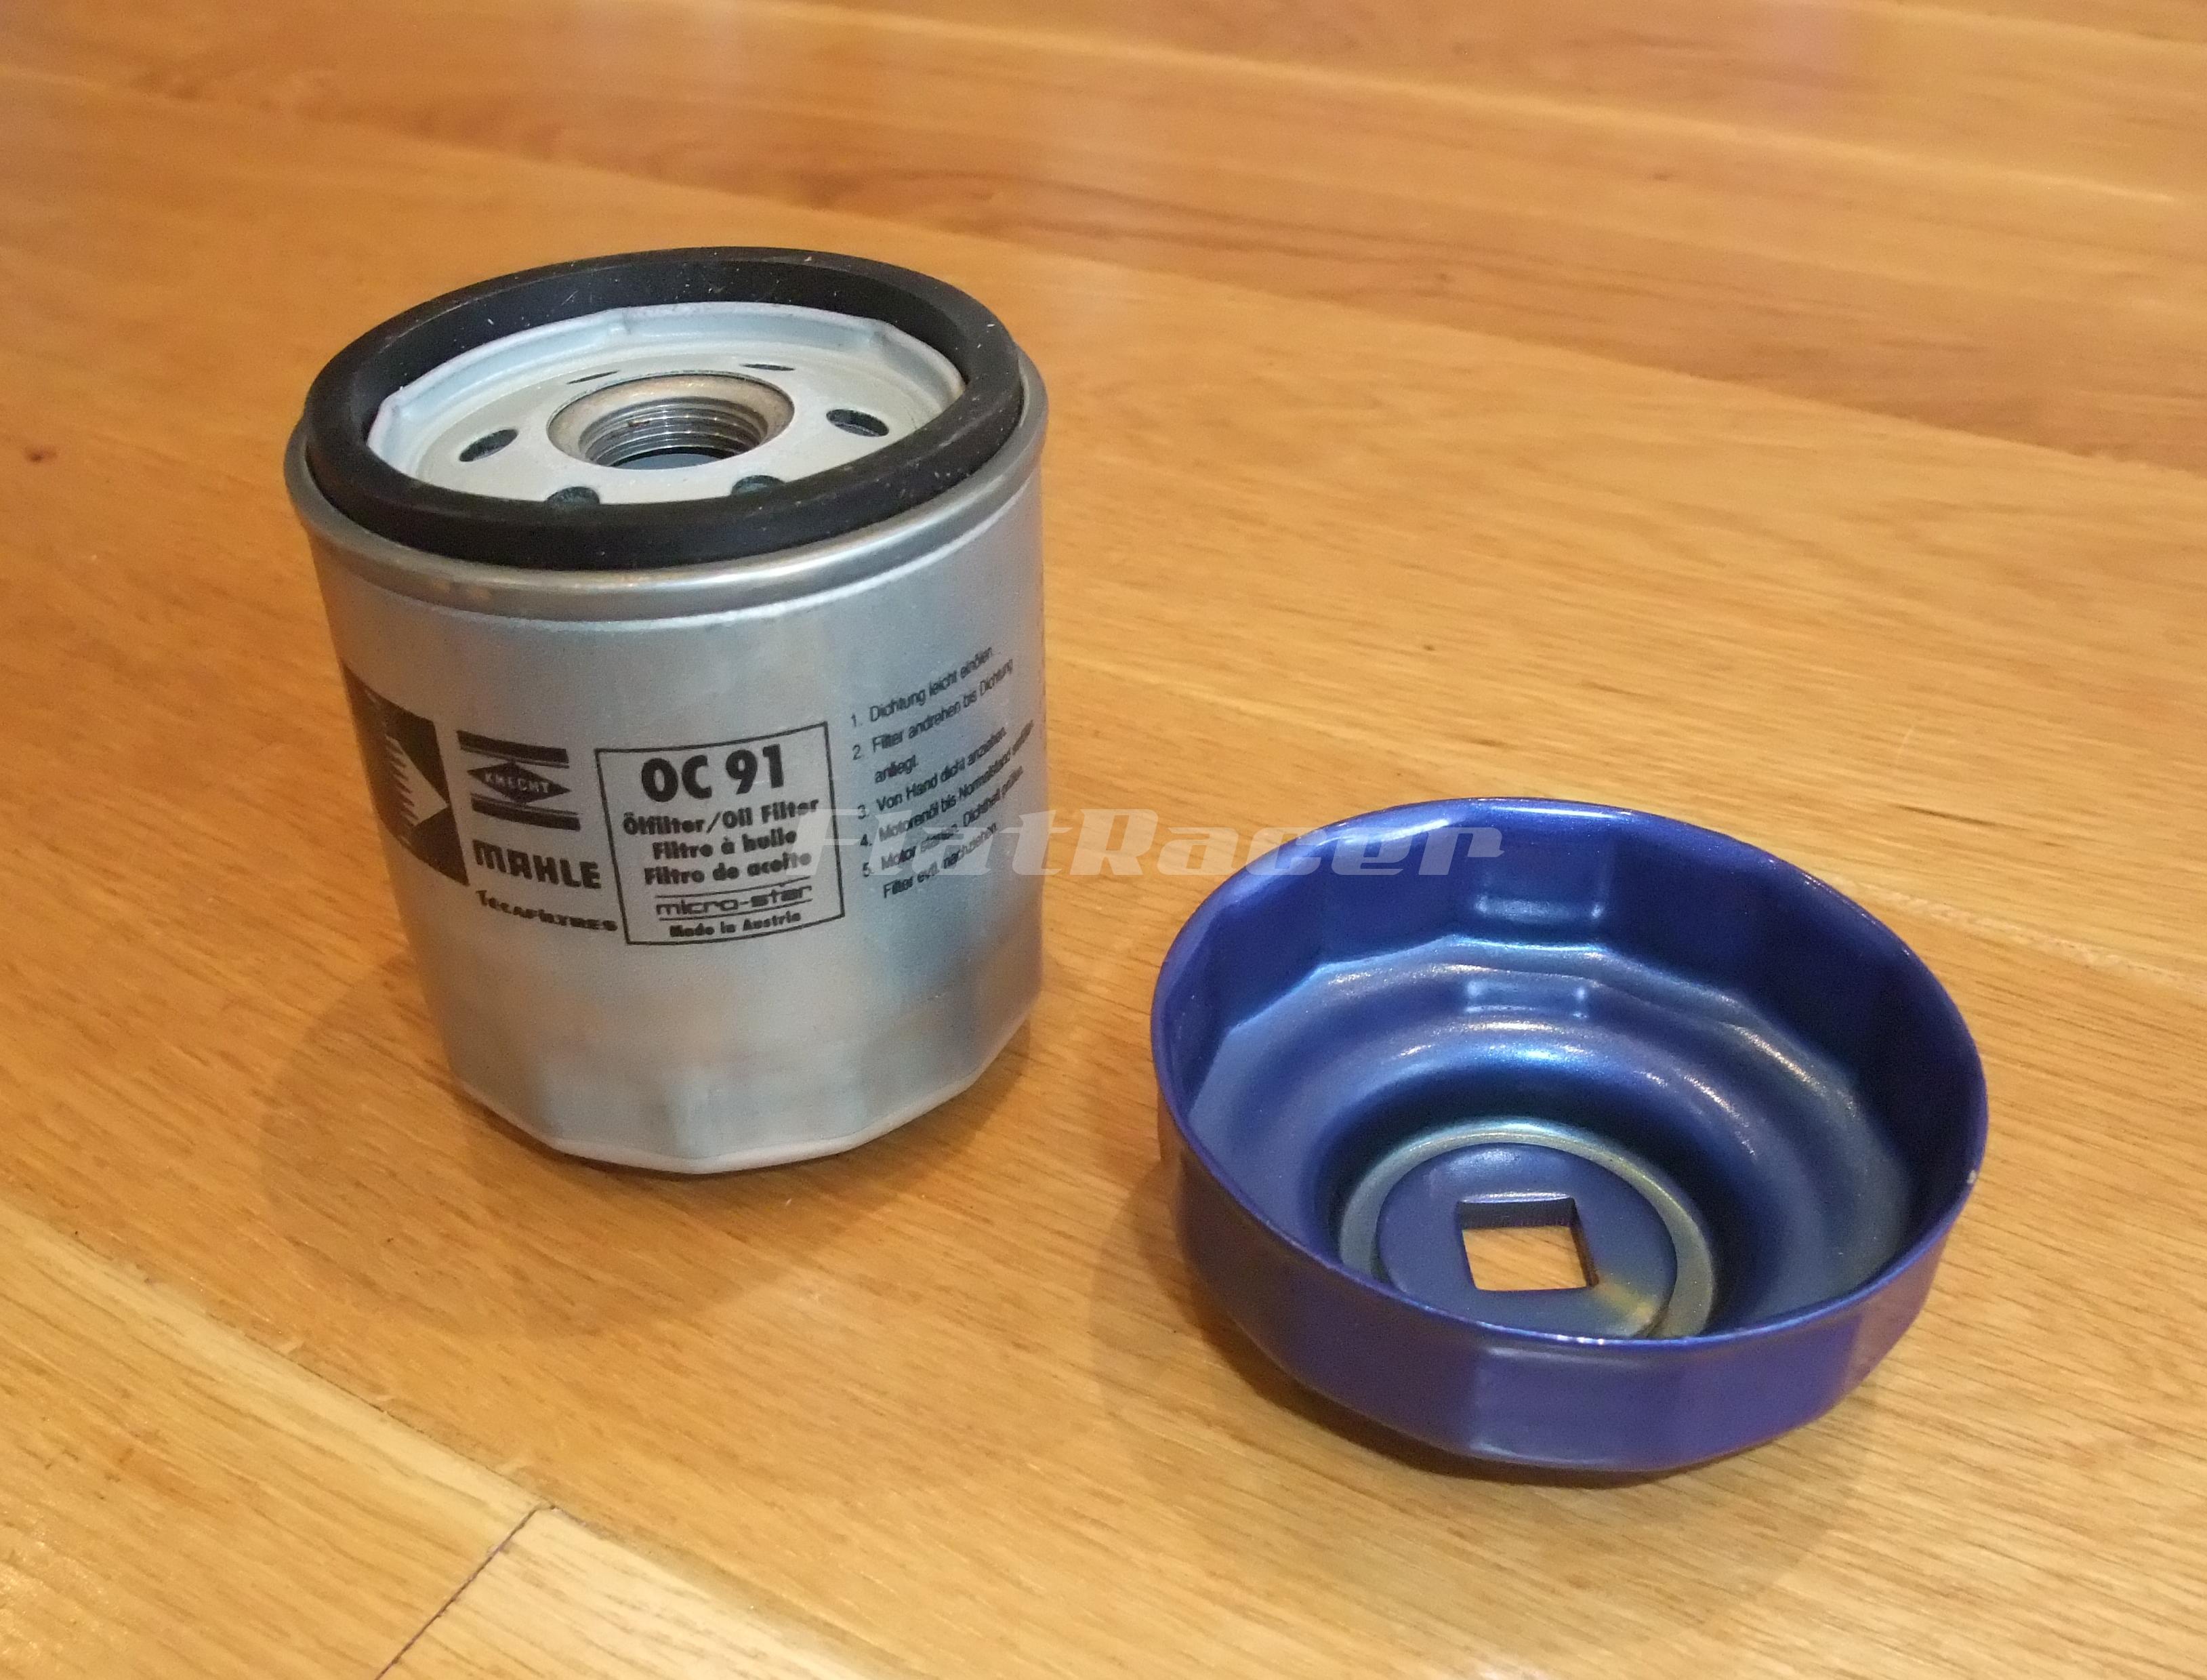 BMW K & R Oil Filter Wrench - 75mm - 14 flats